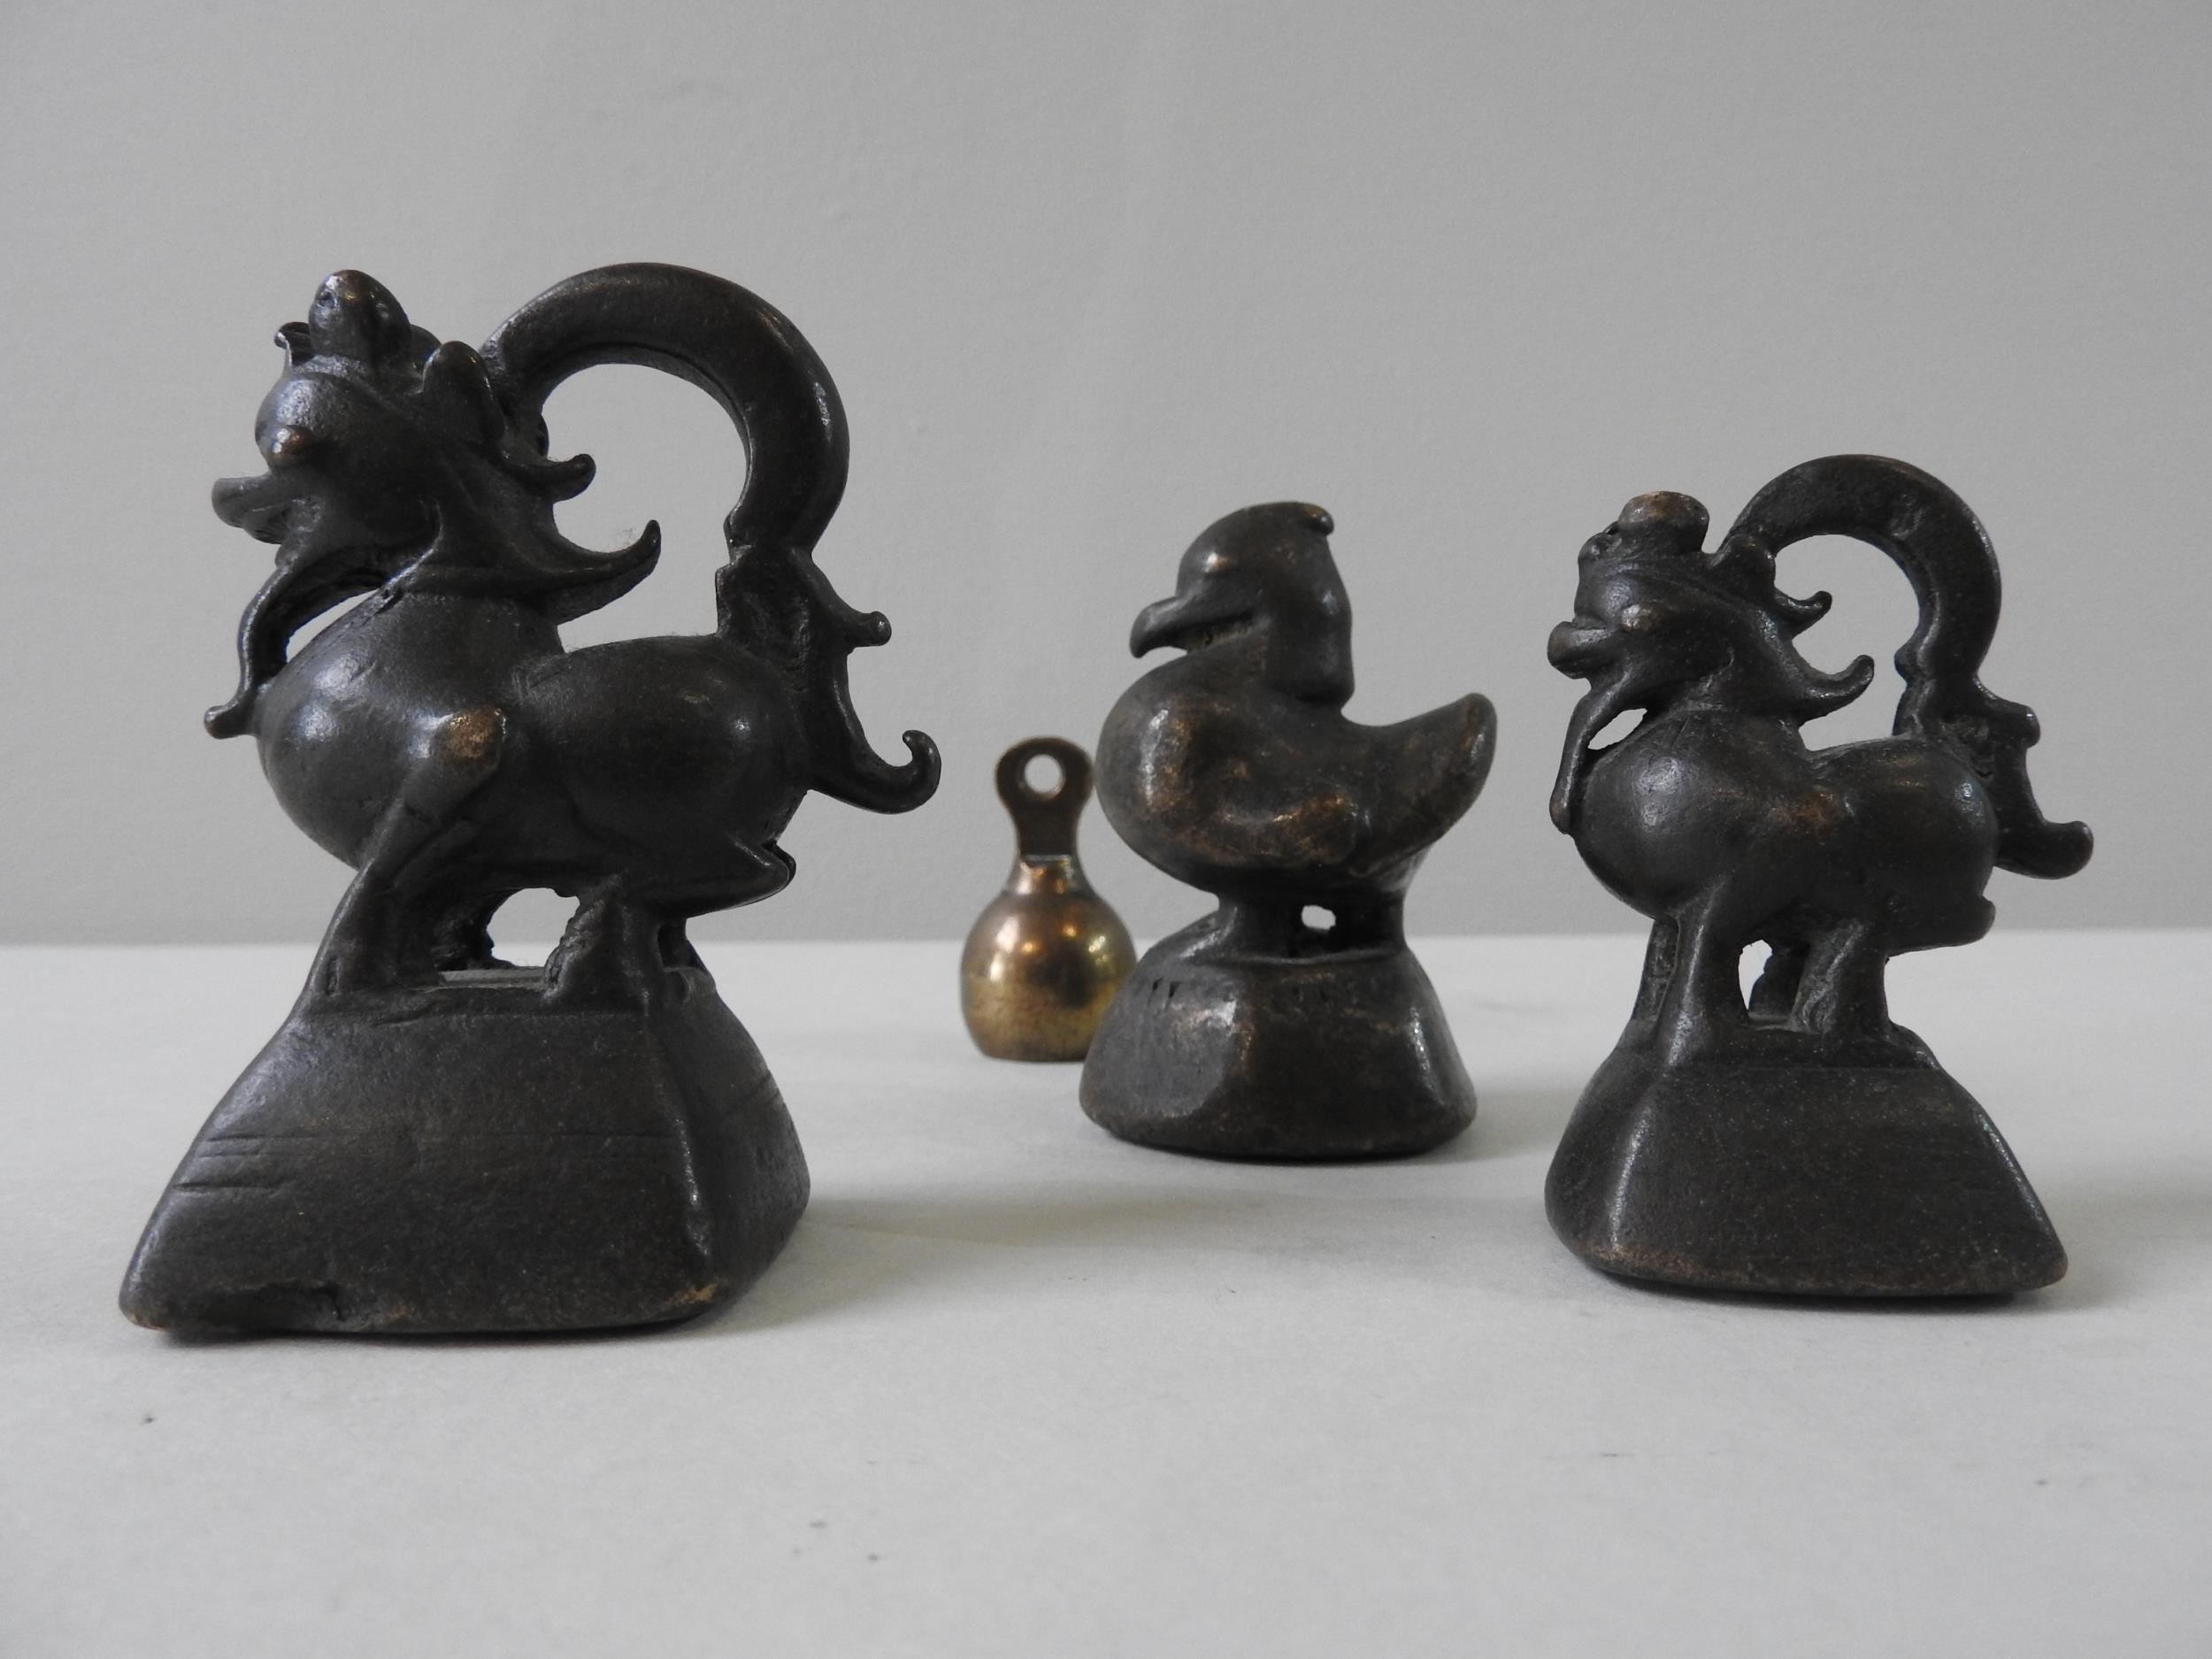 THREE ASHANTI BRONZE OPIUM OR GOLD WEIGHTS in the form of a duck and two stylised creatures, 7cm max - Image 4 of 6